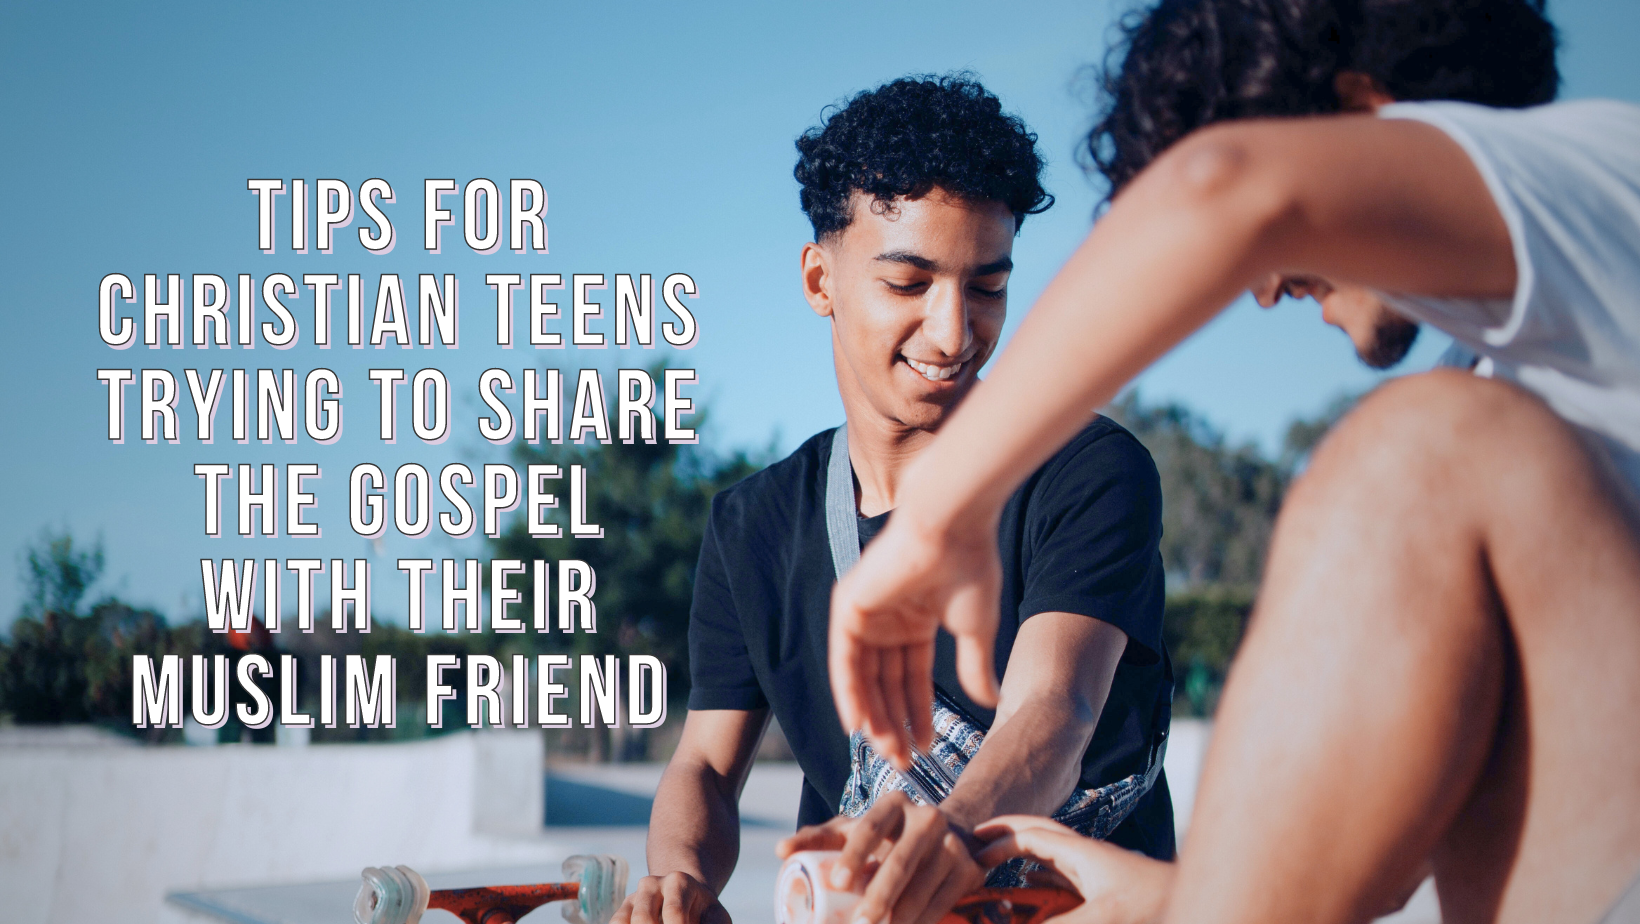 Blog title image - two teenage friends